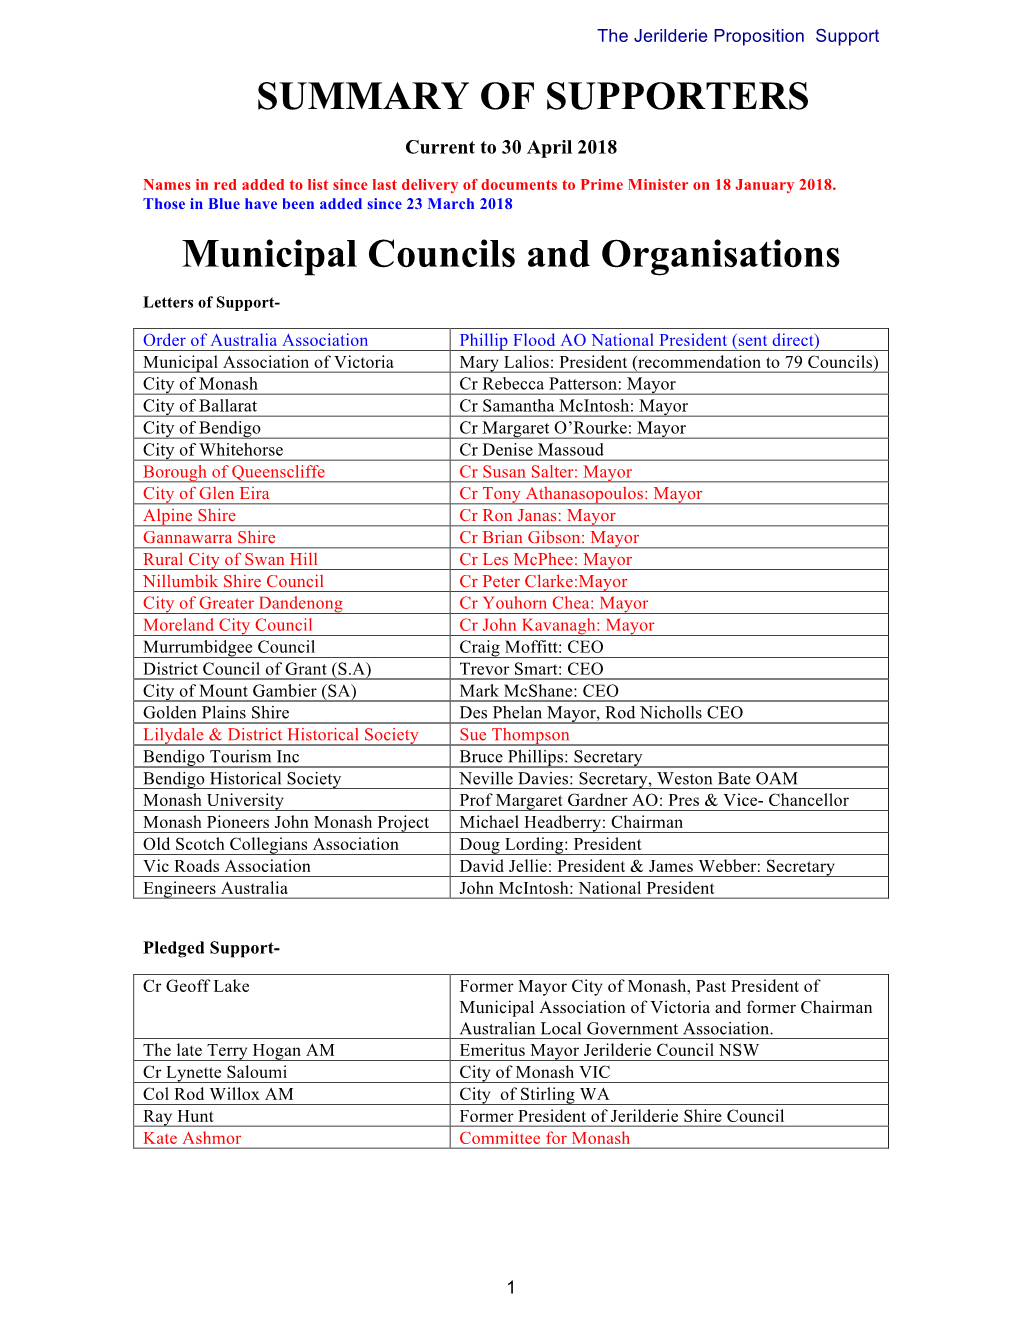 SUMMARY of SUPPORTERS Municipal Councils and Organisations